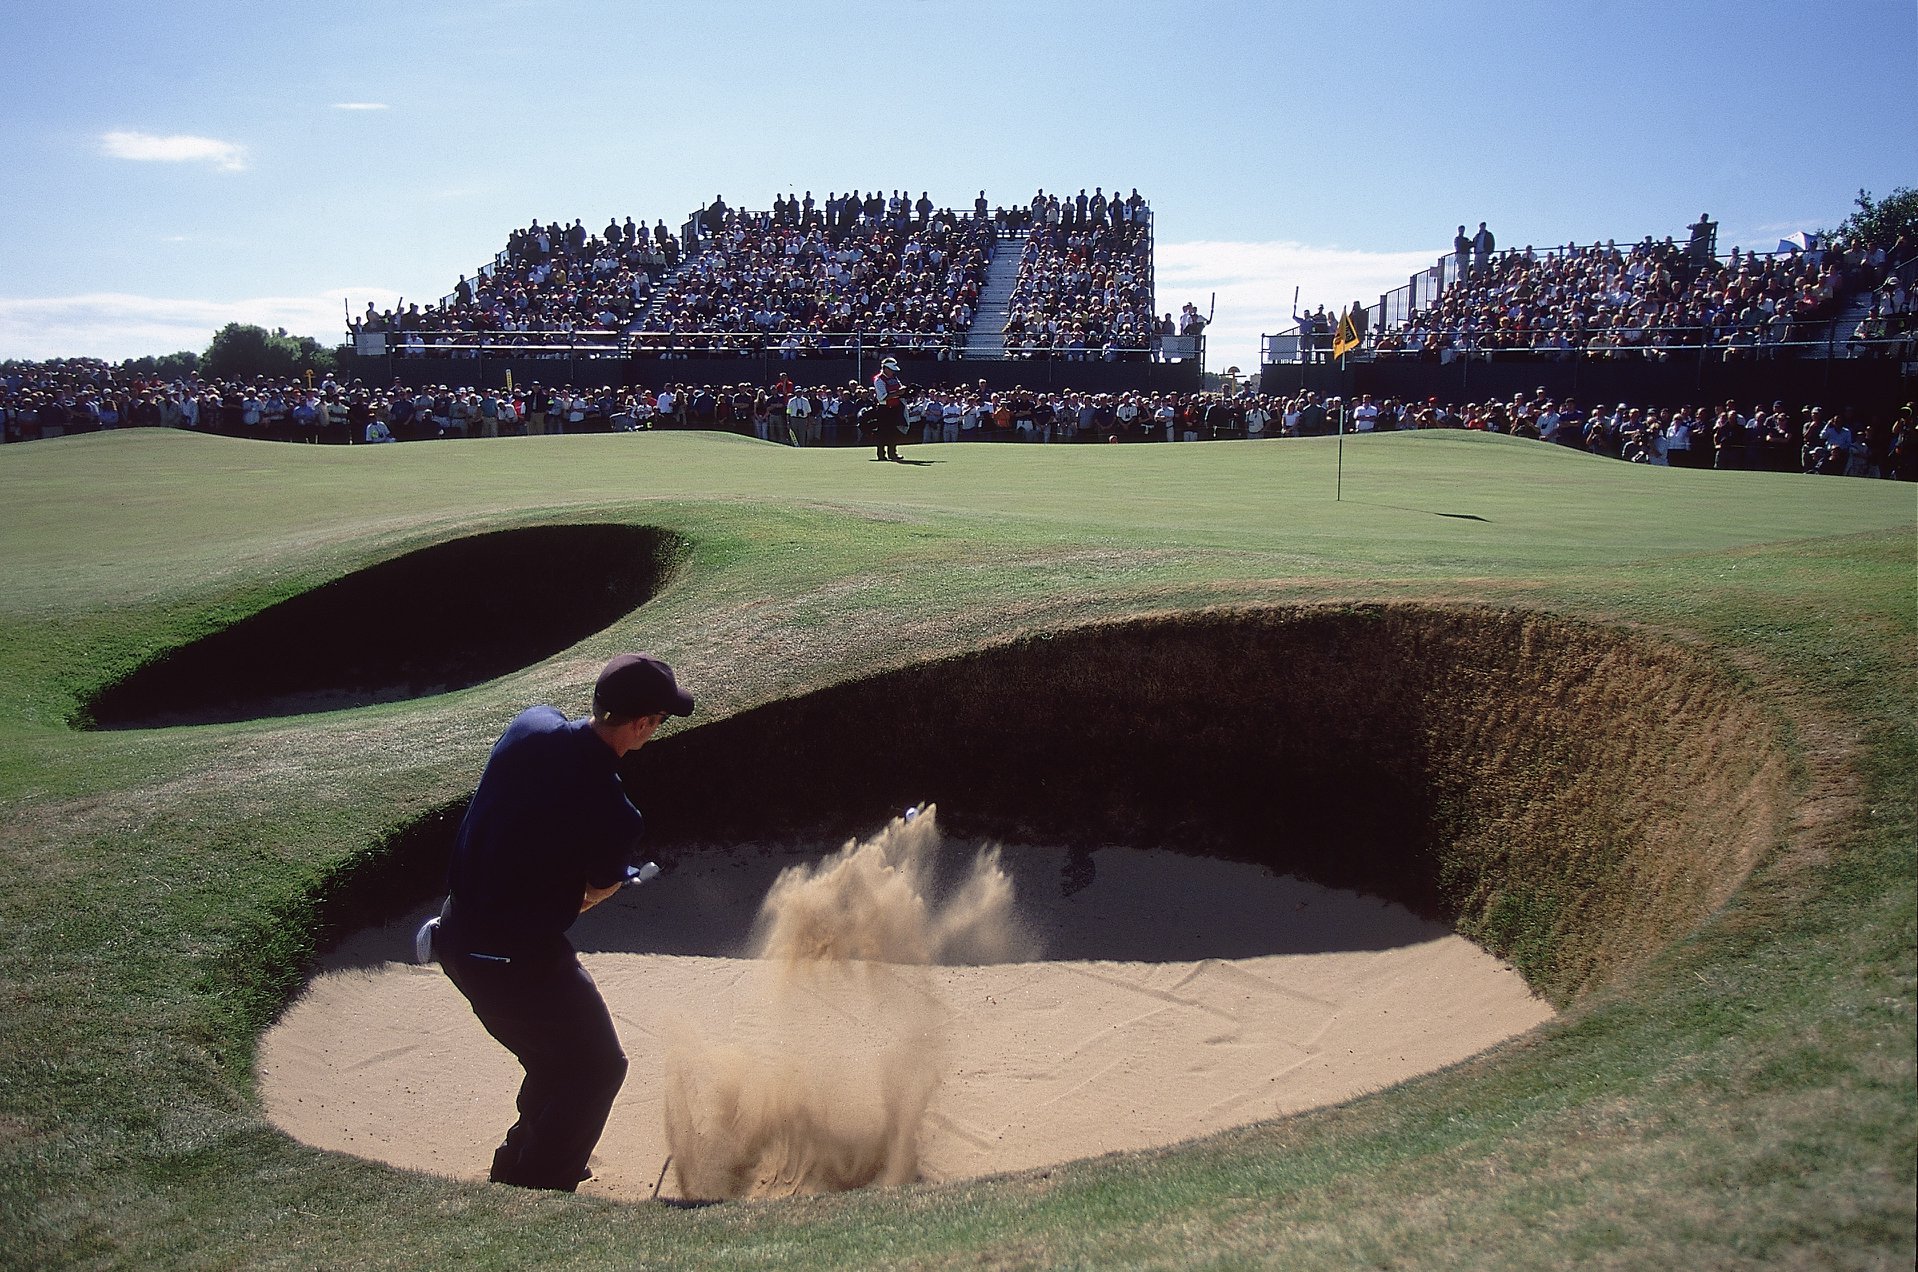 The Open Championship: Britain’s First and most Exclusive Golf Tournament